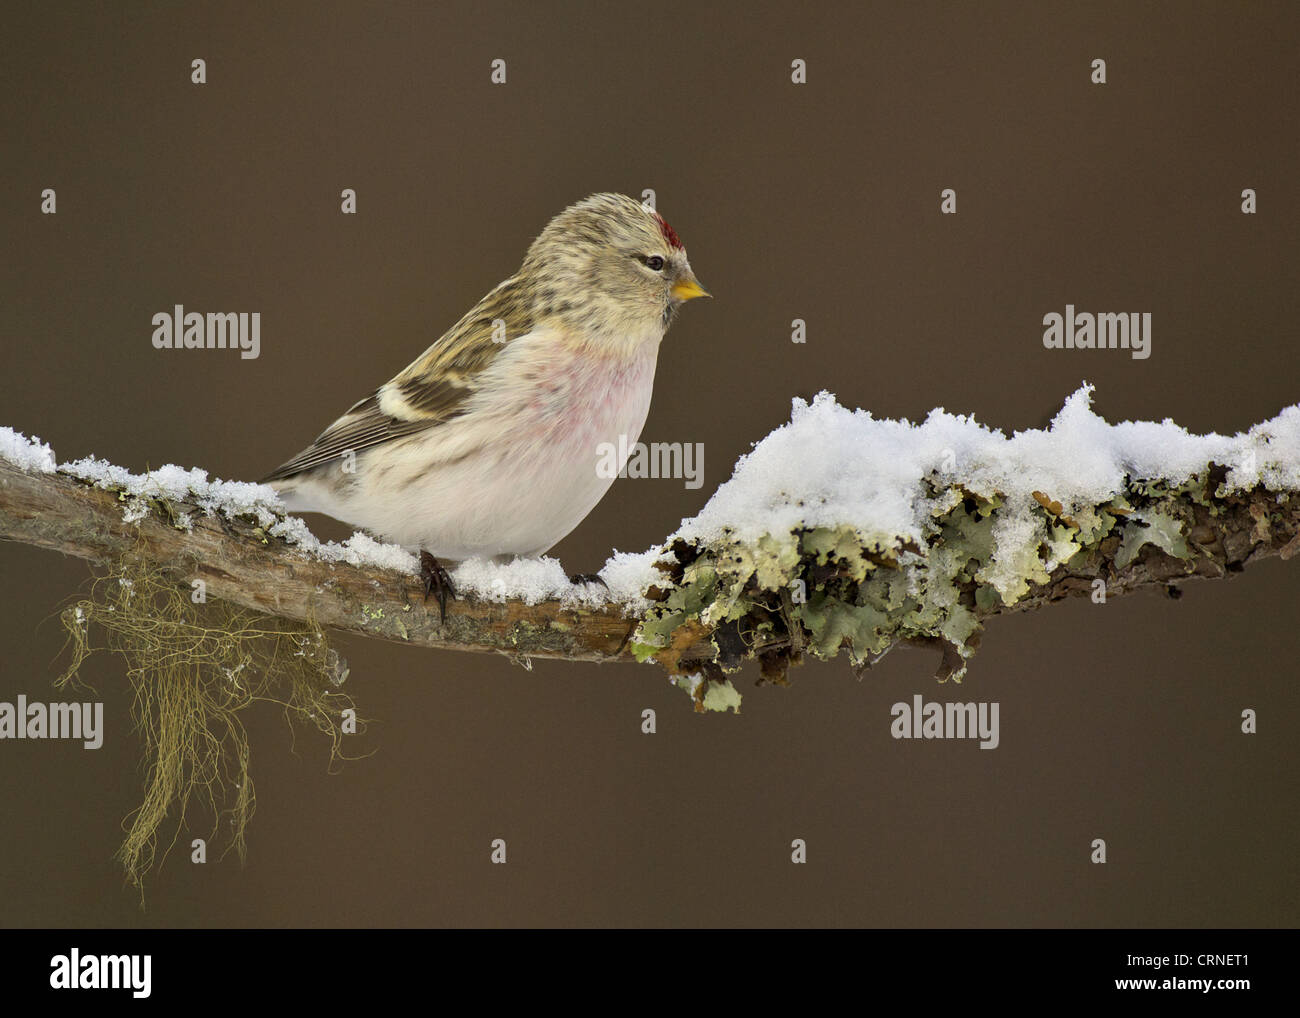 Arctic Redpoll (Carduelis hornemanni) adult male, spring plumage, perched on lichen covered branch in snow, Kaamanen, Inari, Stock Photo